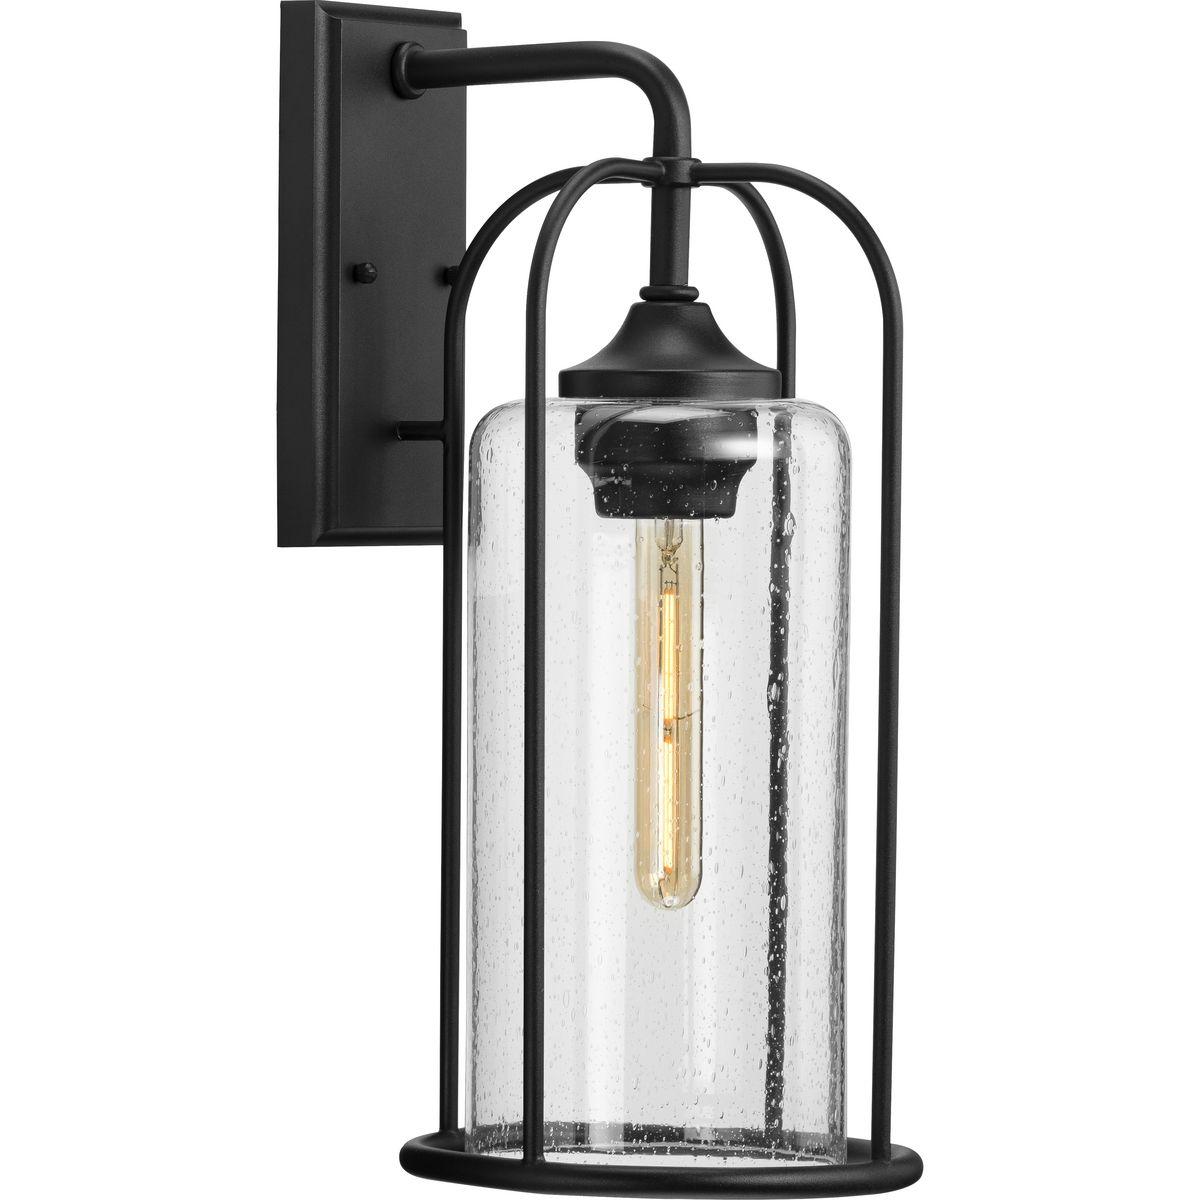 Hubbell P560257-031 Incorporate a timeless style inspired by Victorian-era gaslight fittings with the Watch Hill Collection 1-Light Textured Black Clear Seeded Glass Farmhouse Outdoor Large Wall Lantern Light. The elongated cage design highlighted by gracefully curving slend